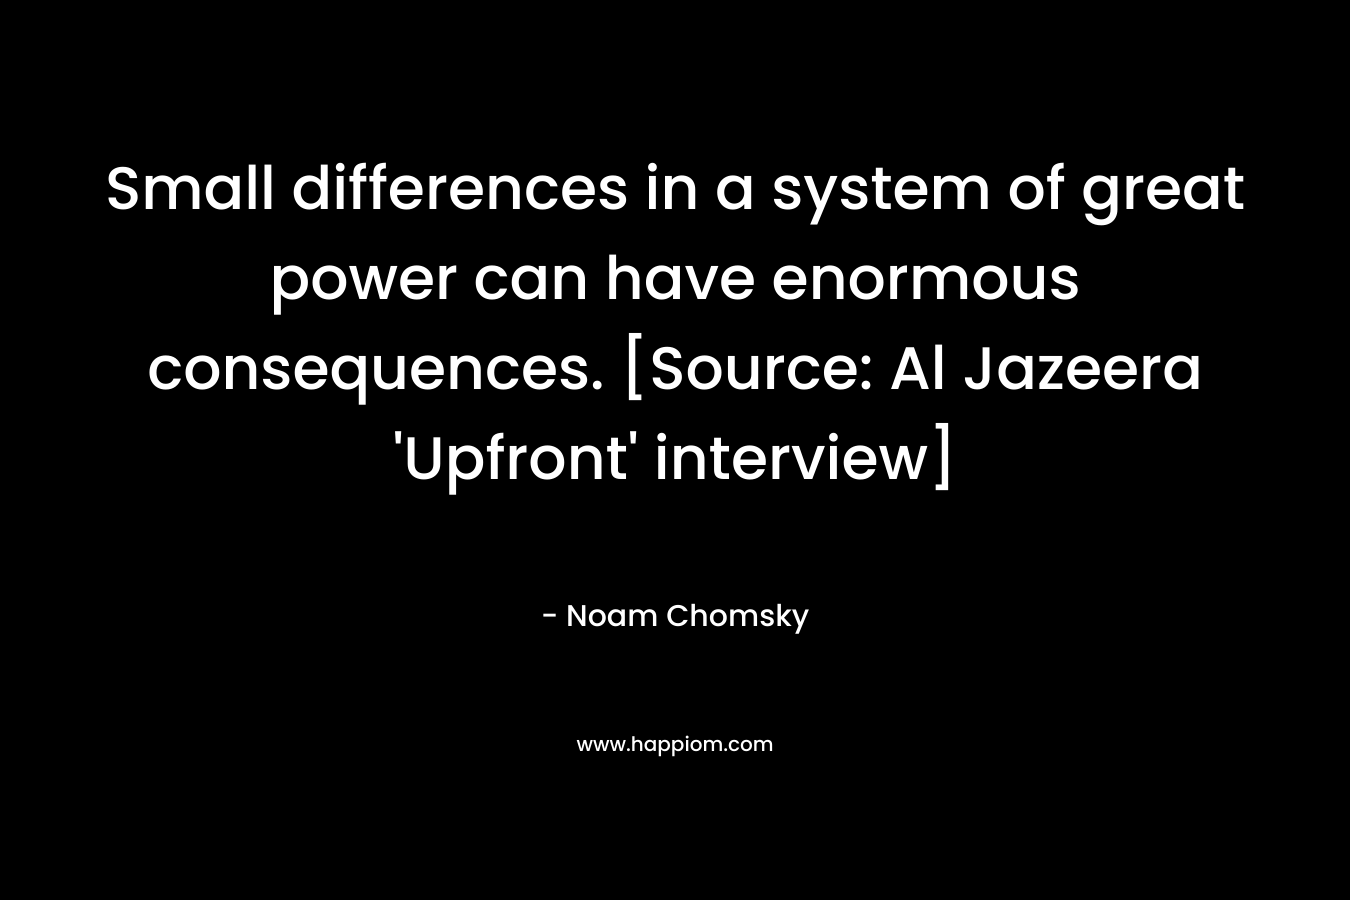 Small differences in a system of great power can have enormous consequences. [Source: Al Jazeera ‘Upfront’ interview] – Noam Chomsky